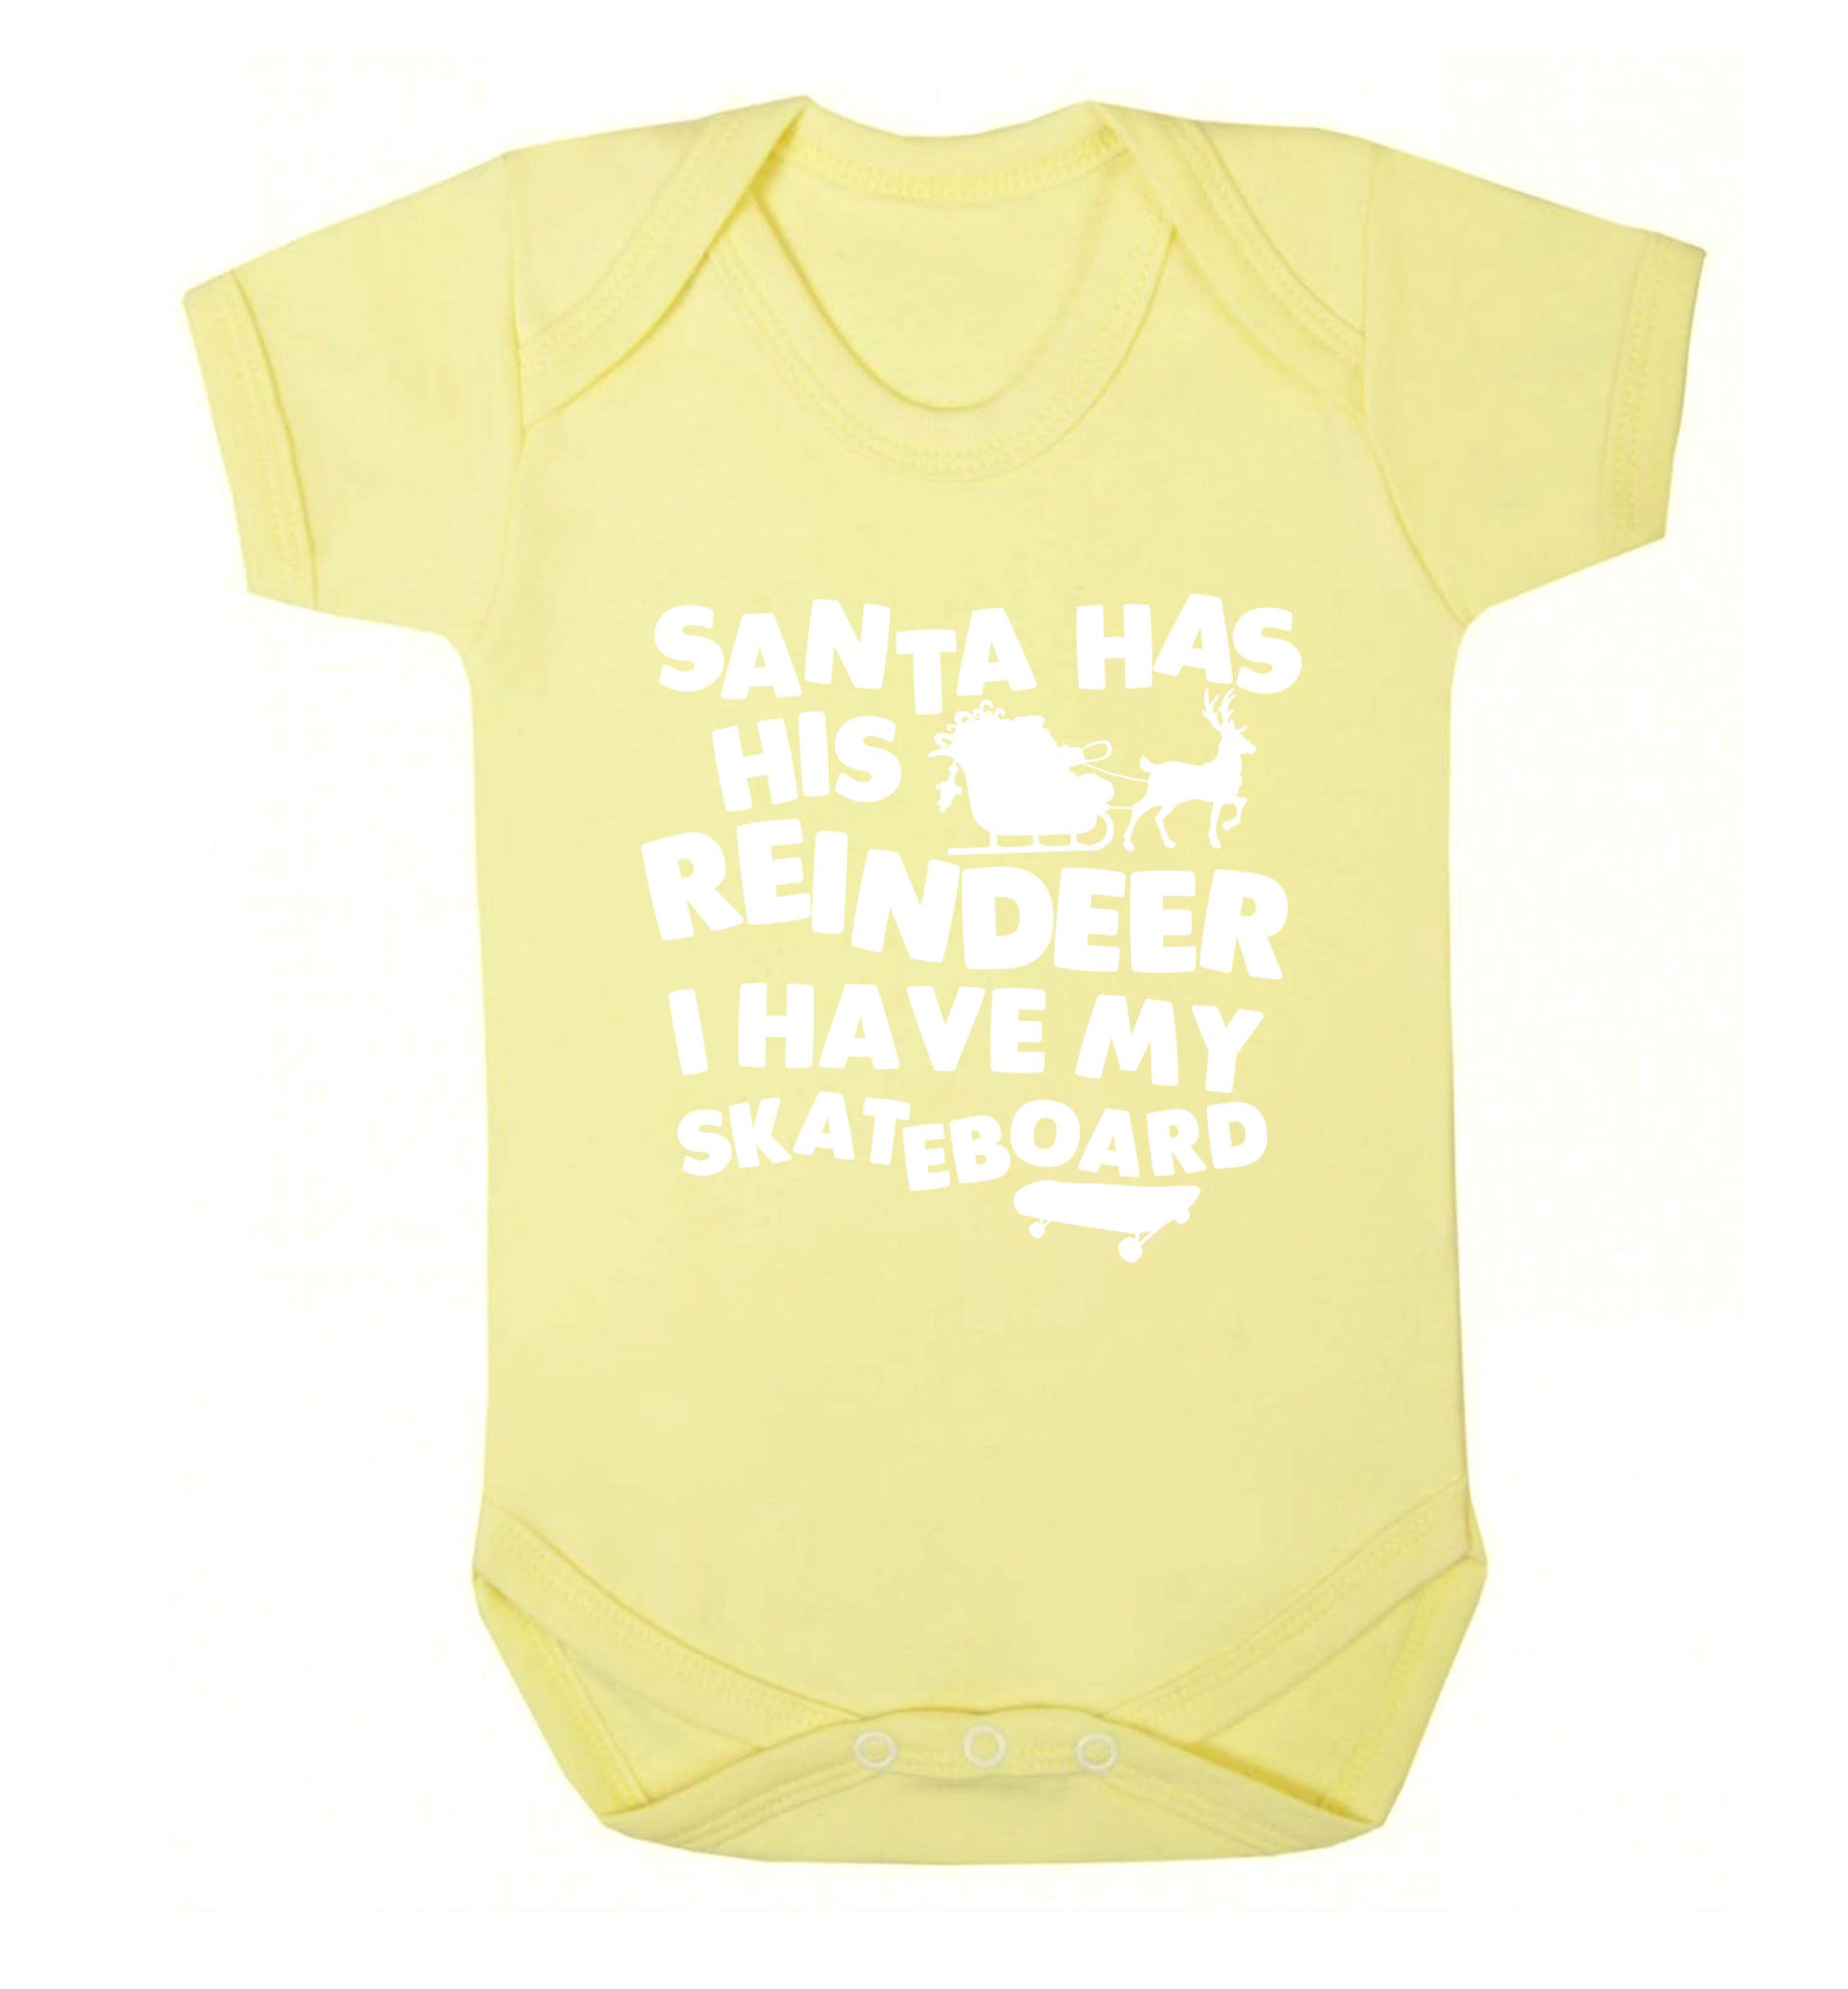 Santa has his reindeer I have my skateboard Baby Vest pale yellow 18-24 months